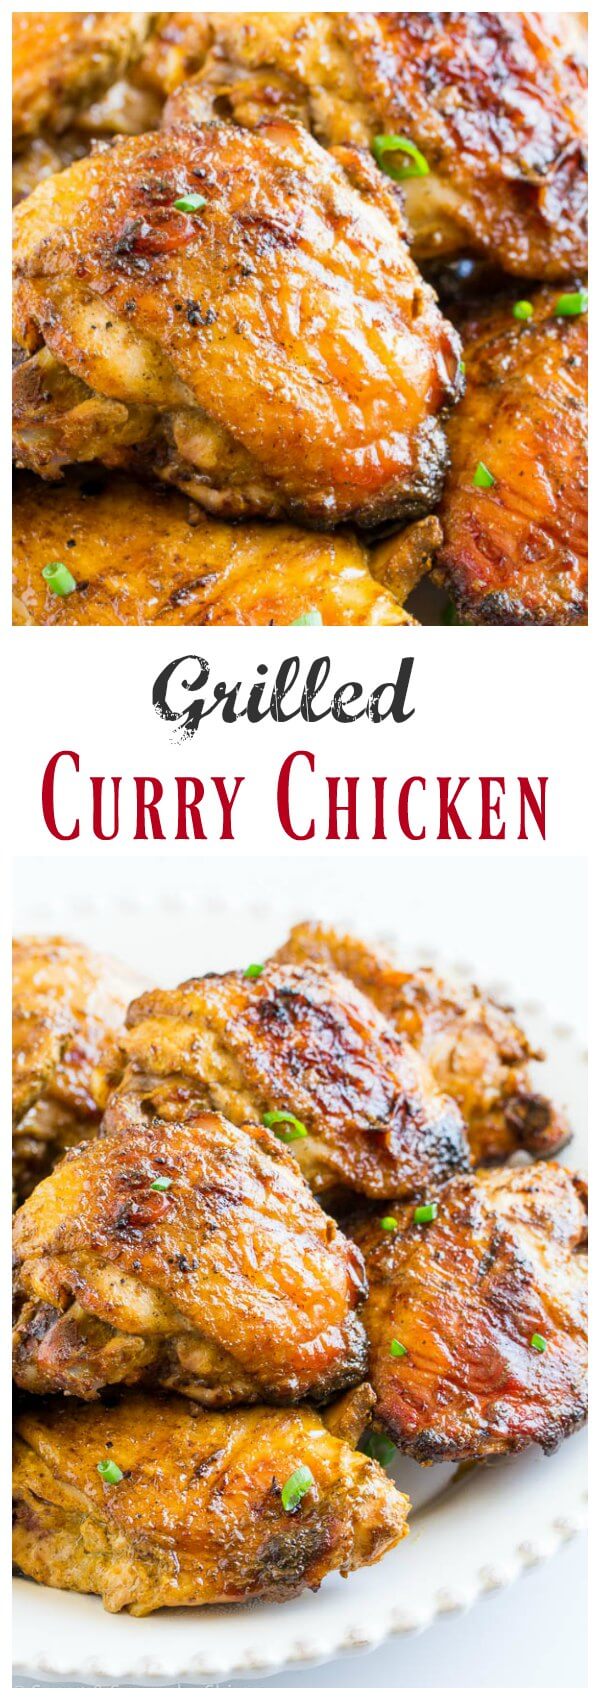 These grilled curry chicken thighs are juicy and flavorful. And it requires minimal hands-on time and only 4 ingredients!